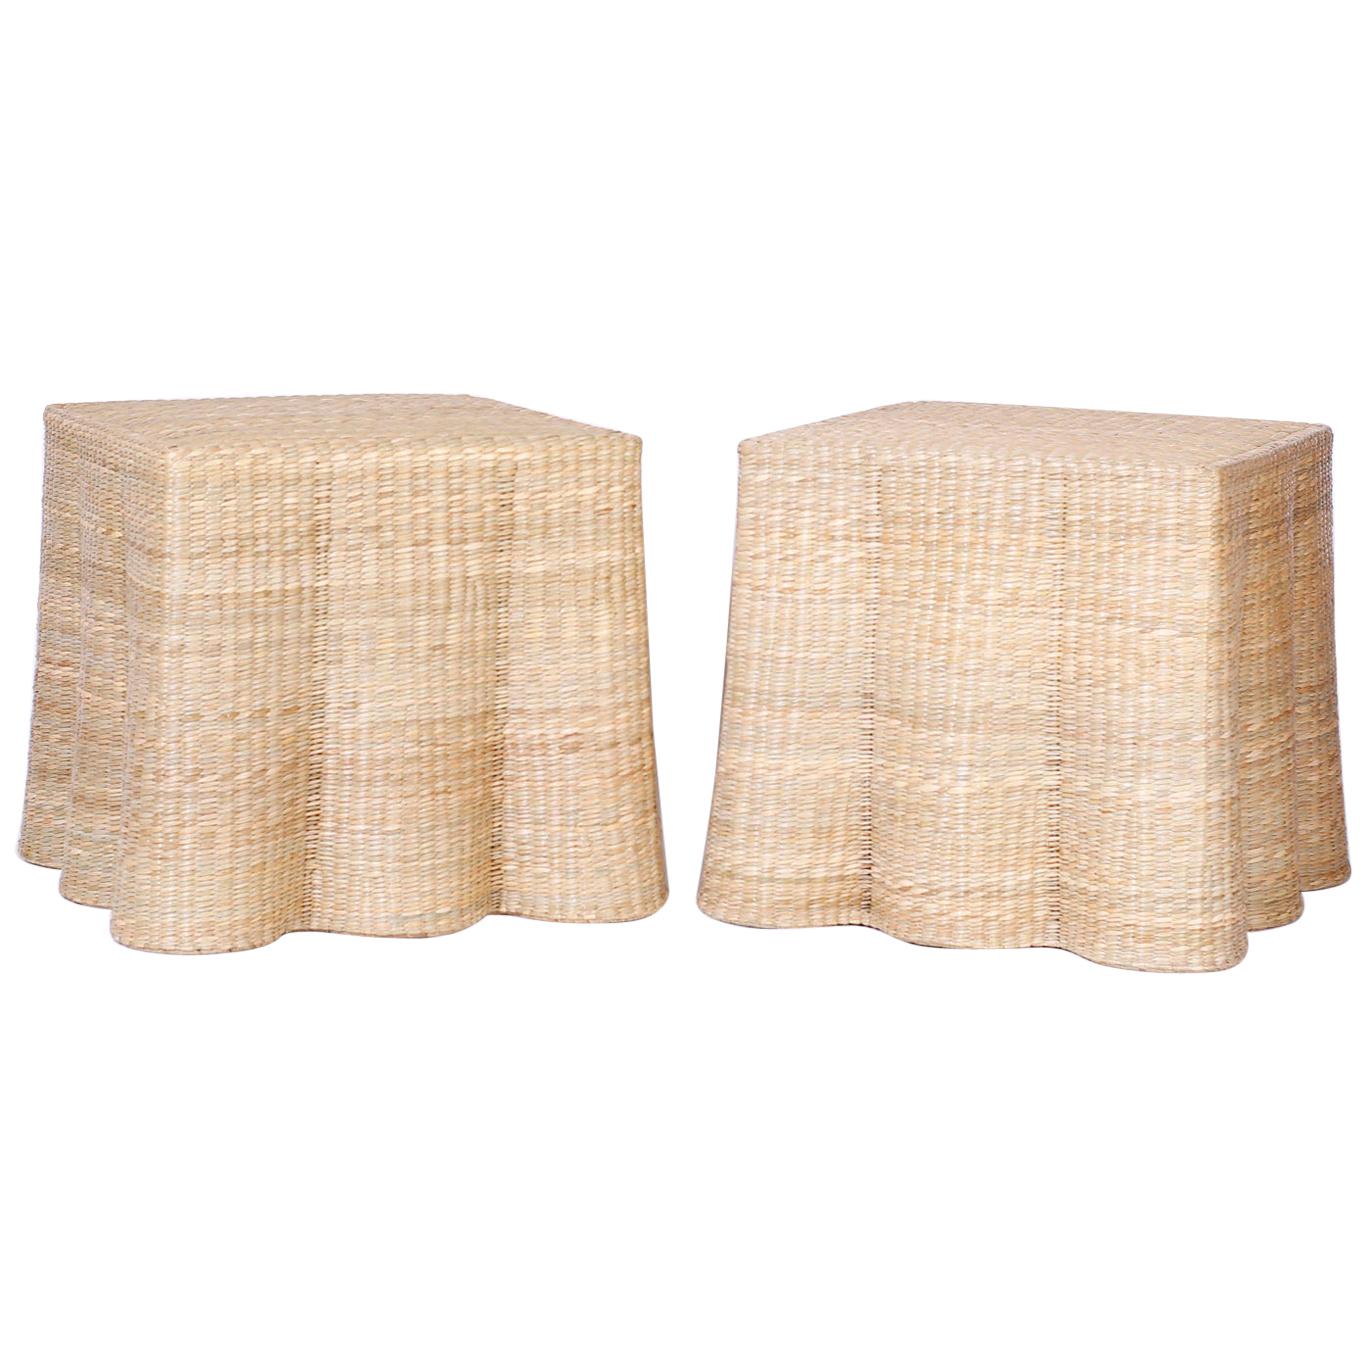 Pair of Wicker Drapery Ghost End Tables or Stands from the FS Flores Collection